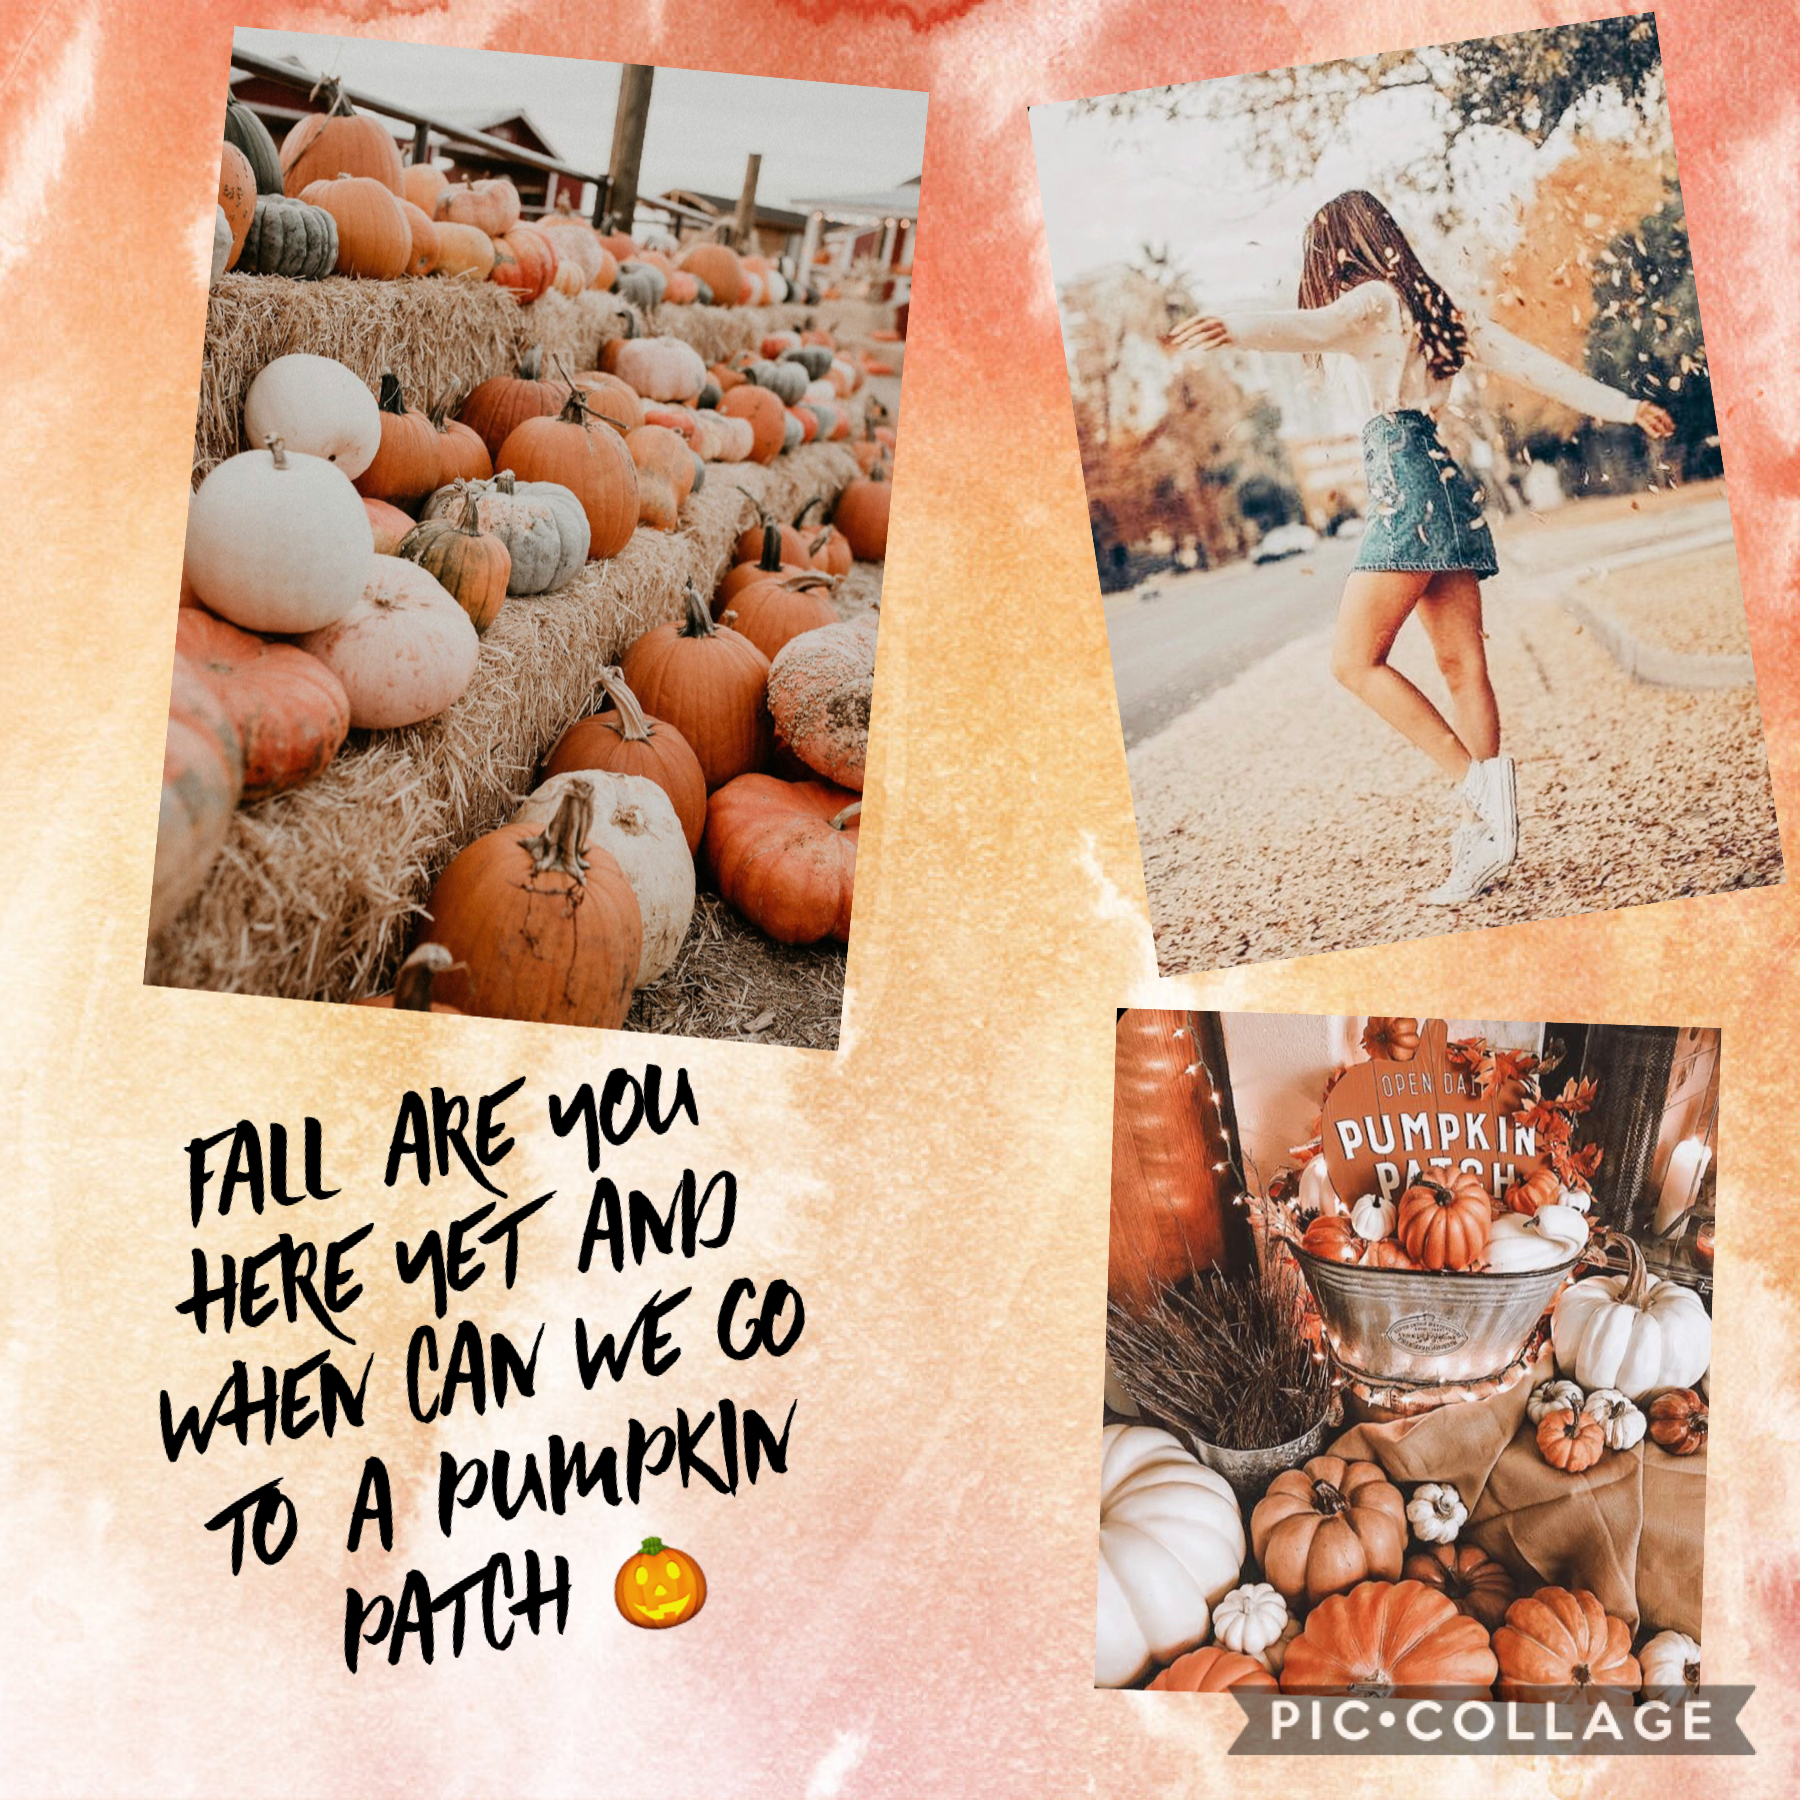 Hi everyone 😊
How is everyone? Hope you all are having a good fall break! And please comment if you have been to a pumpkin patch 🎃 also I’m ready for fall and comment if you are ready for fall too 🍂🍁🎃